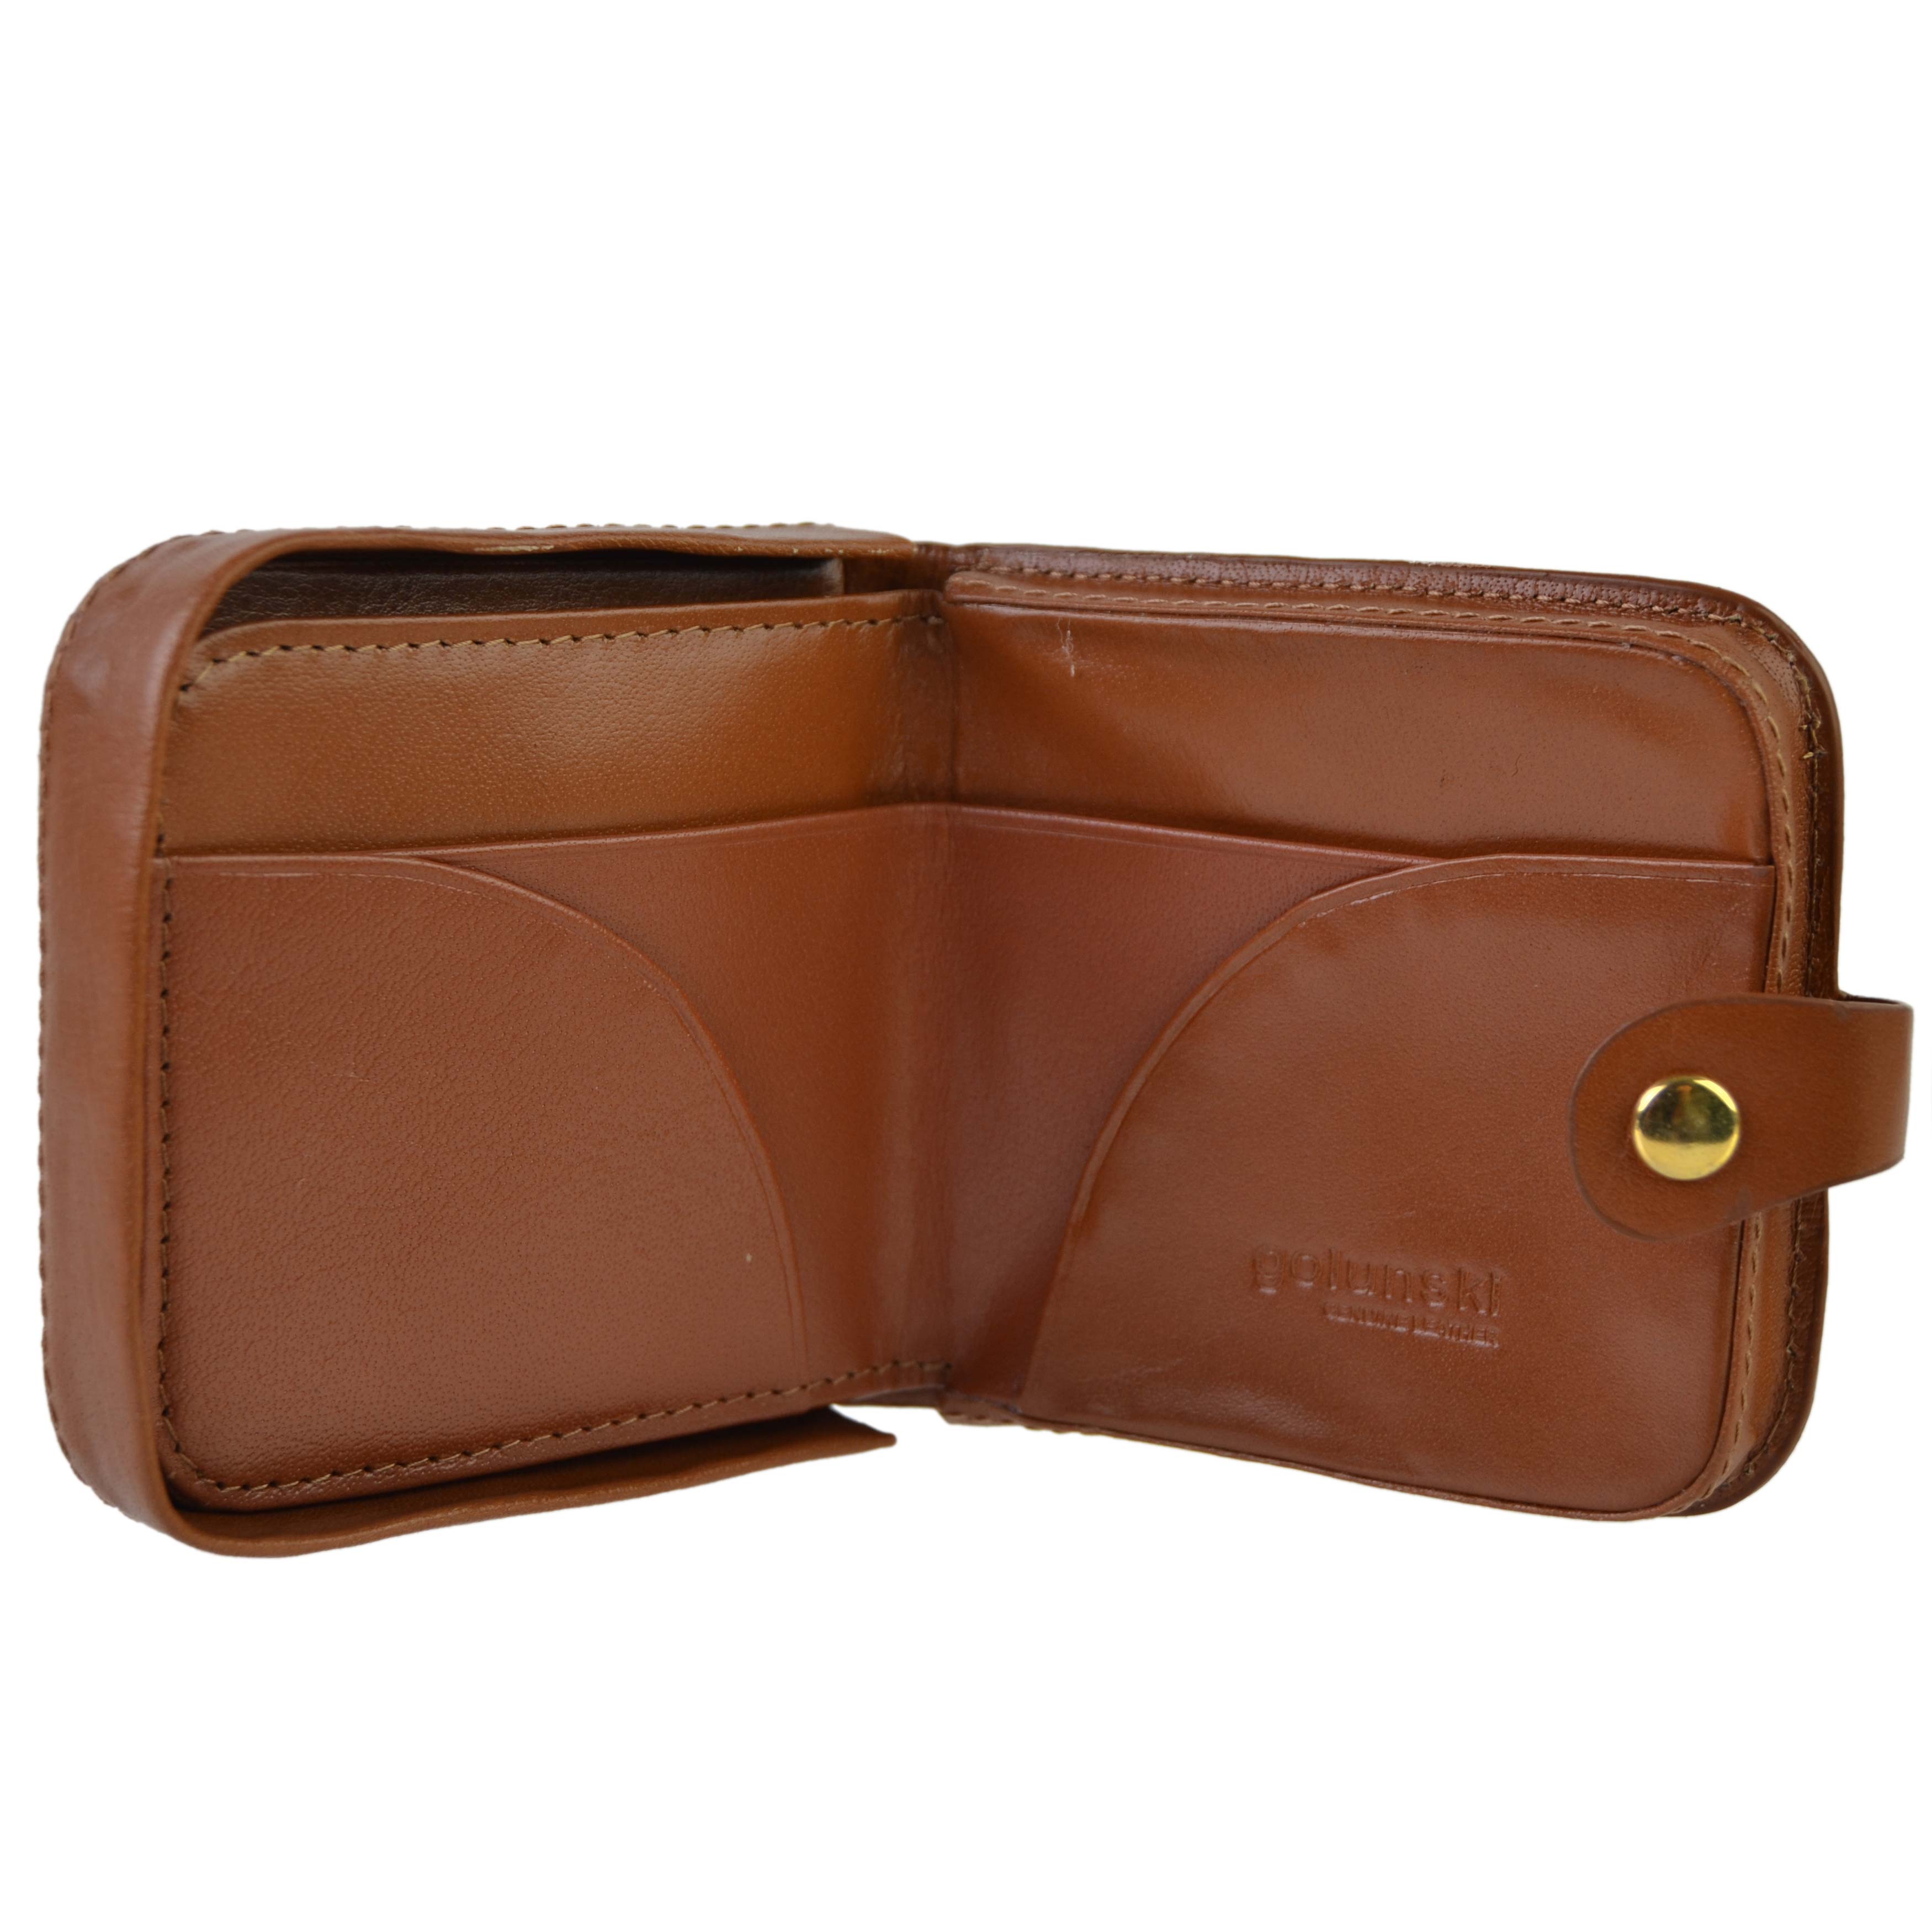 fcity.in - Stylishtrendysimple Pursegents Walletgents Purse For Mentwo